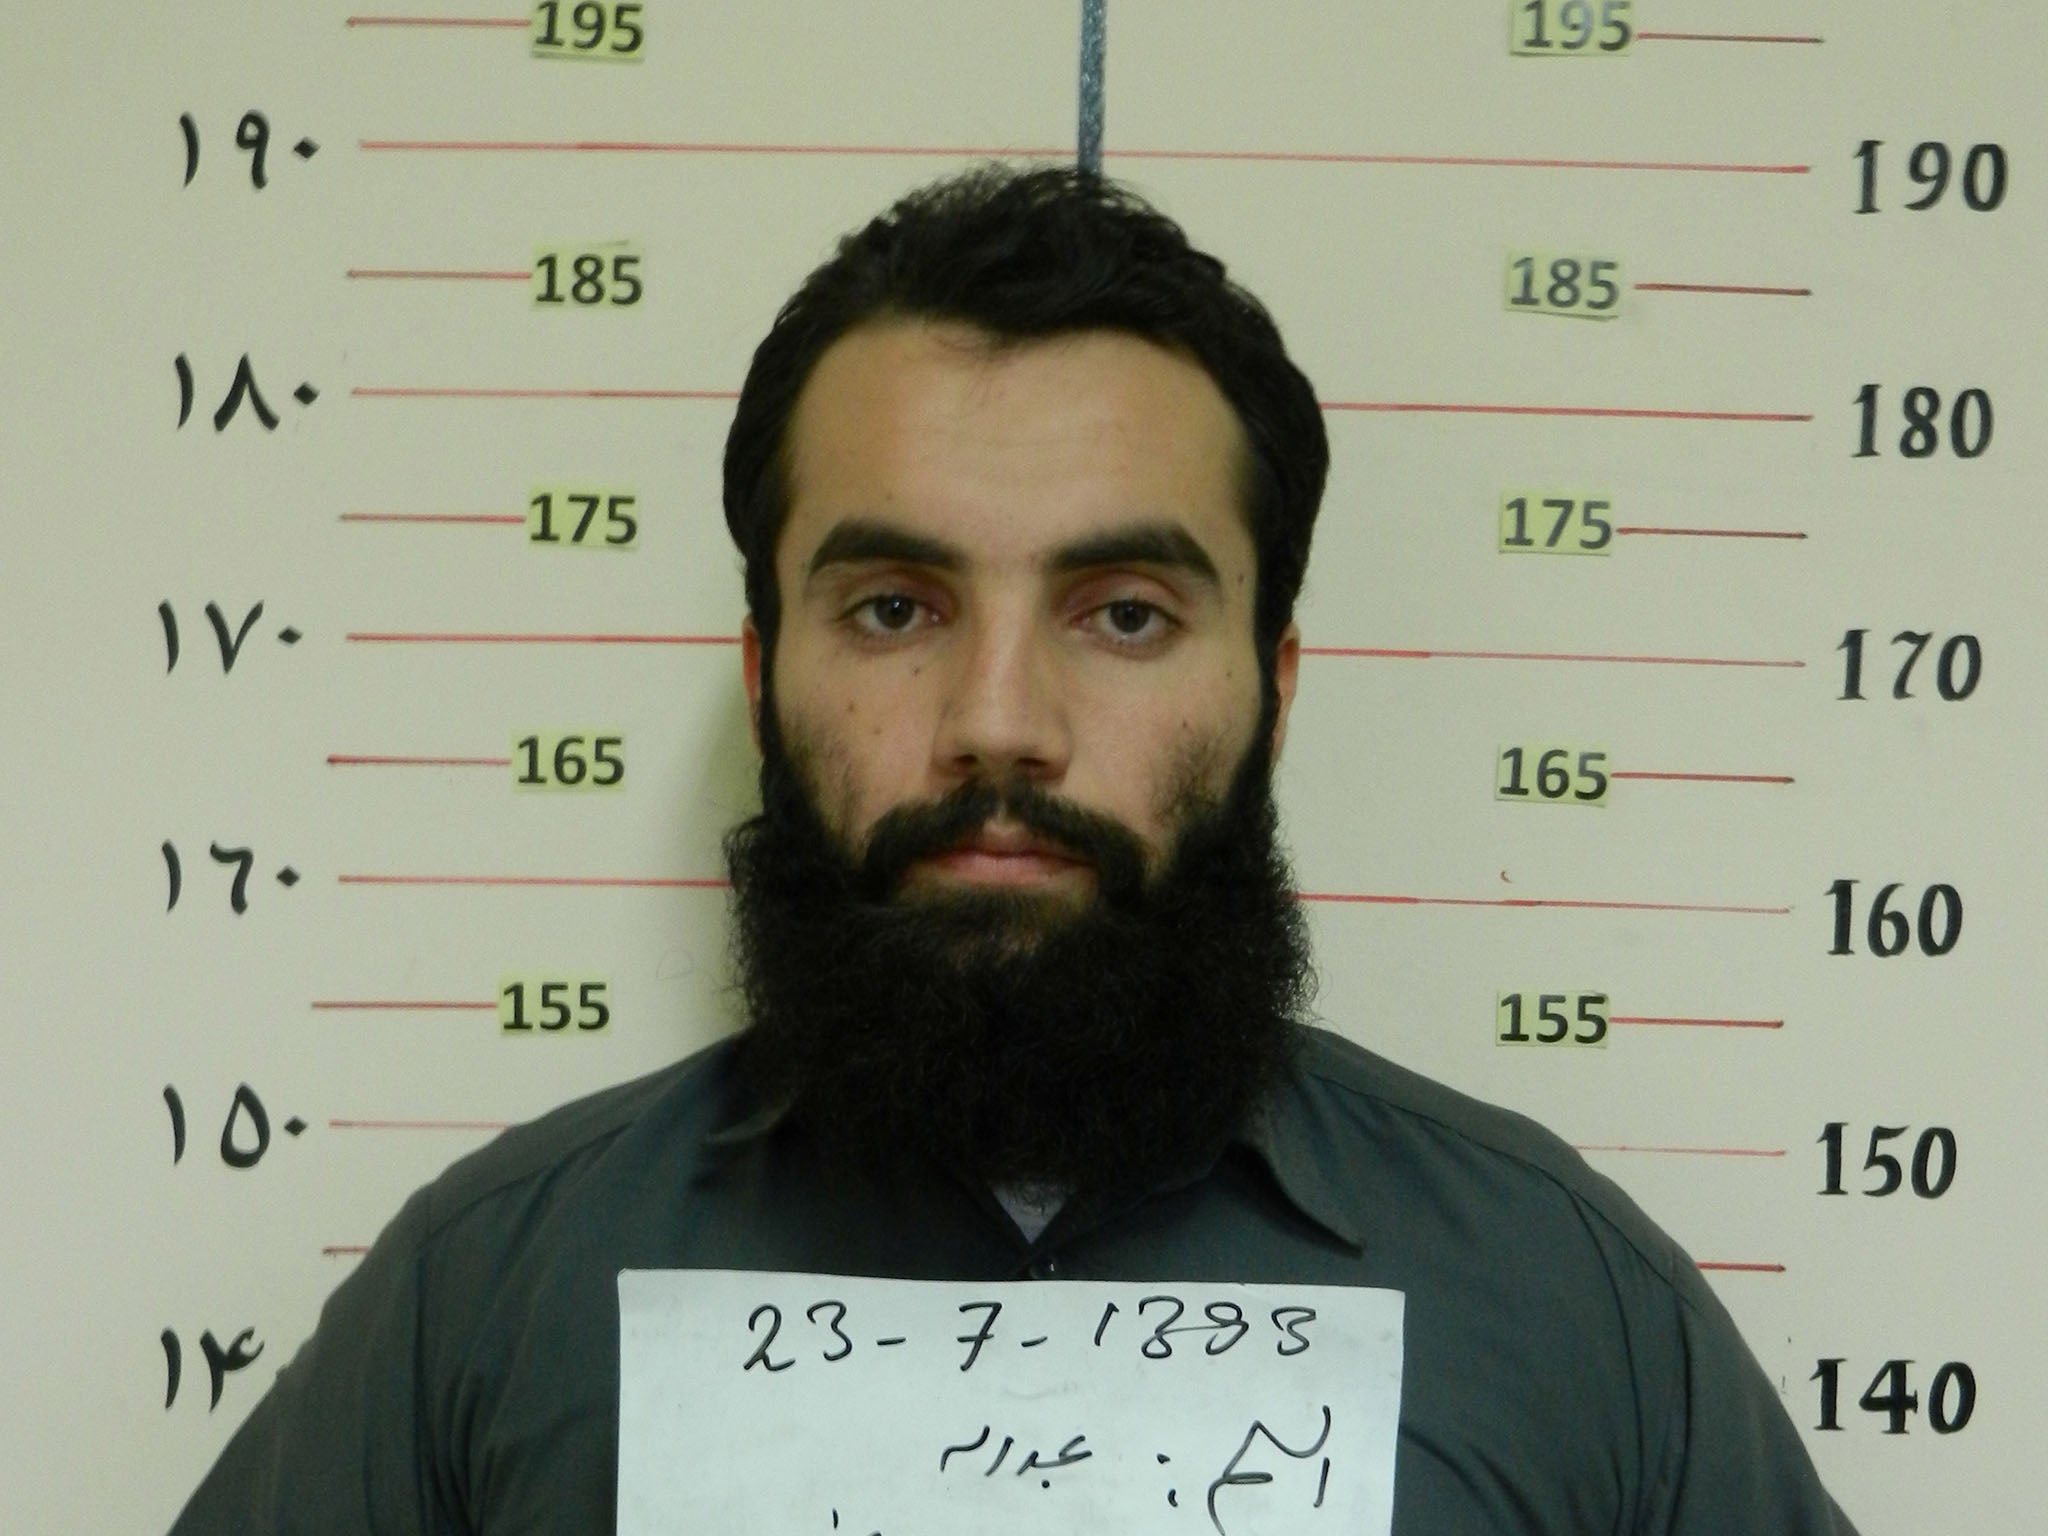 Anas Haqqani, who has presided over some of the worst terrorist attacks in the region in recent years, is among the trio released